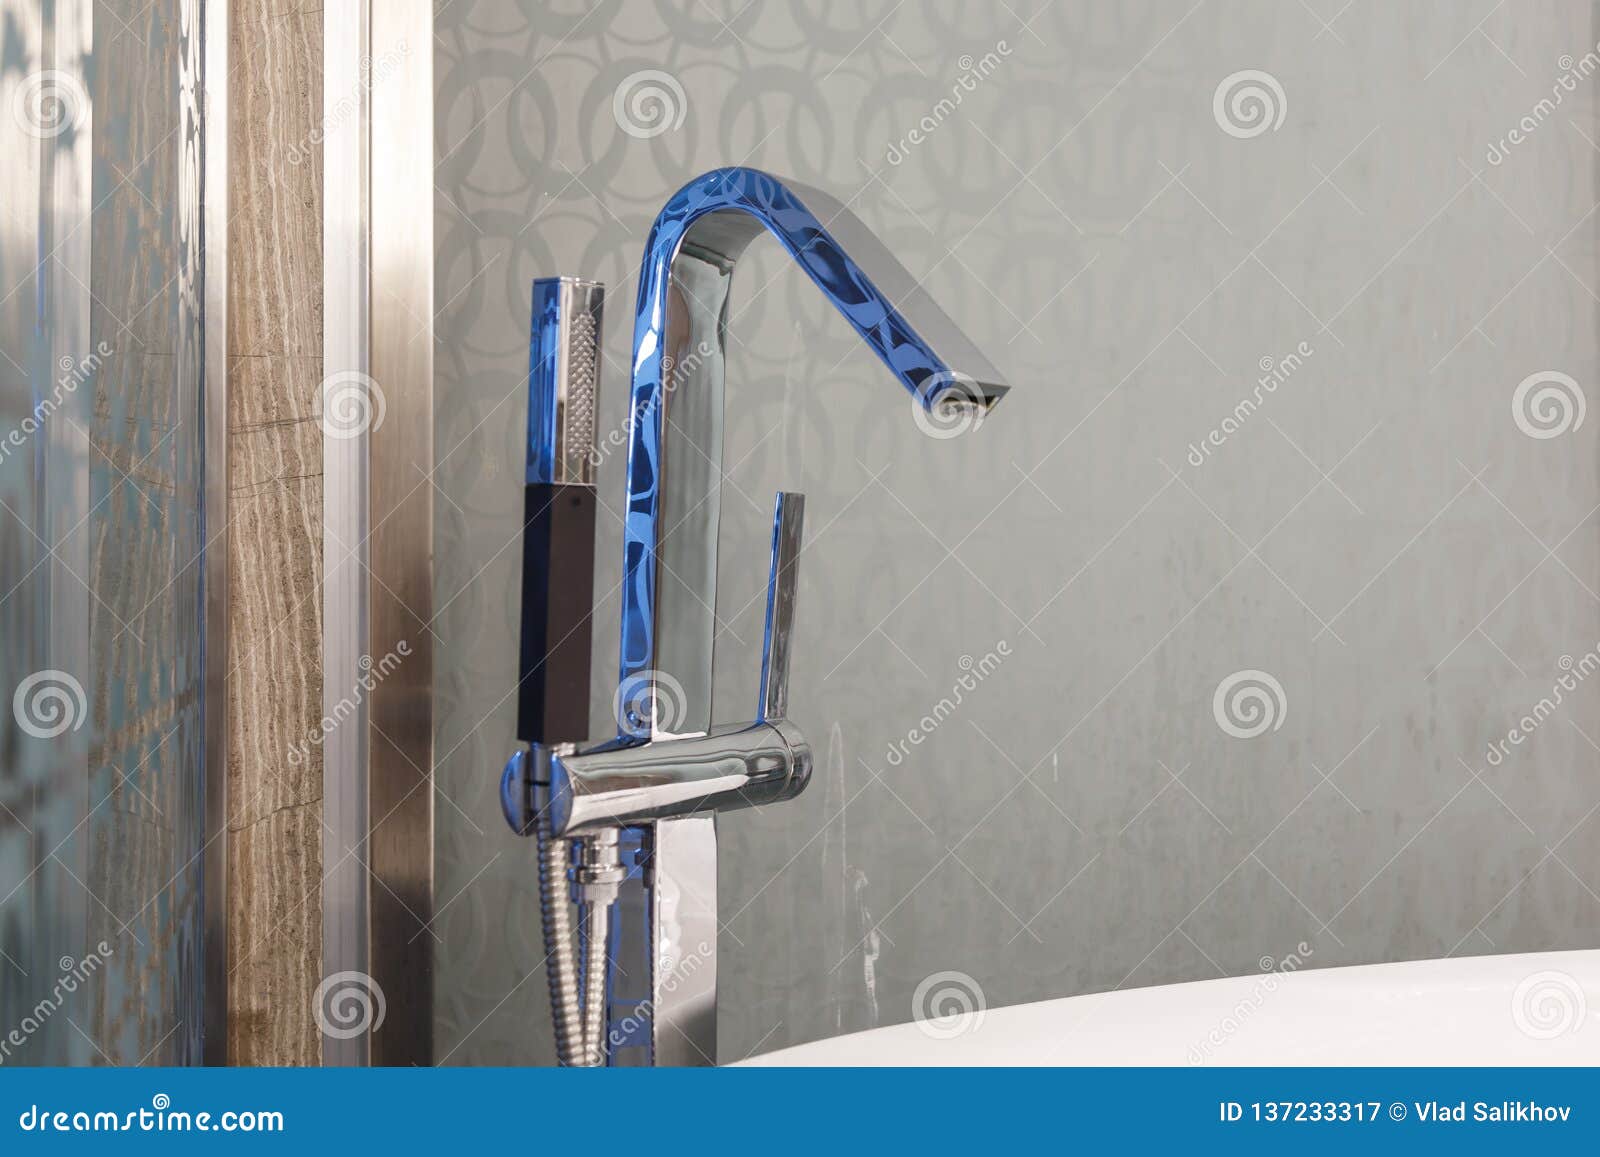 Luxury Bath Tub And Faucet Stock Image Image Of Attachment